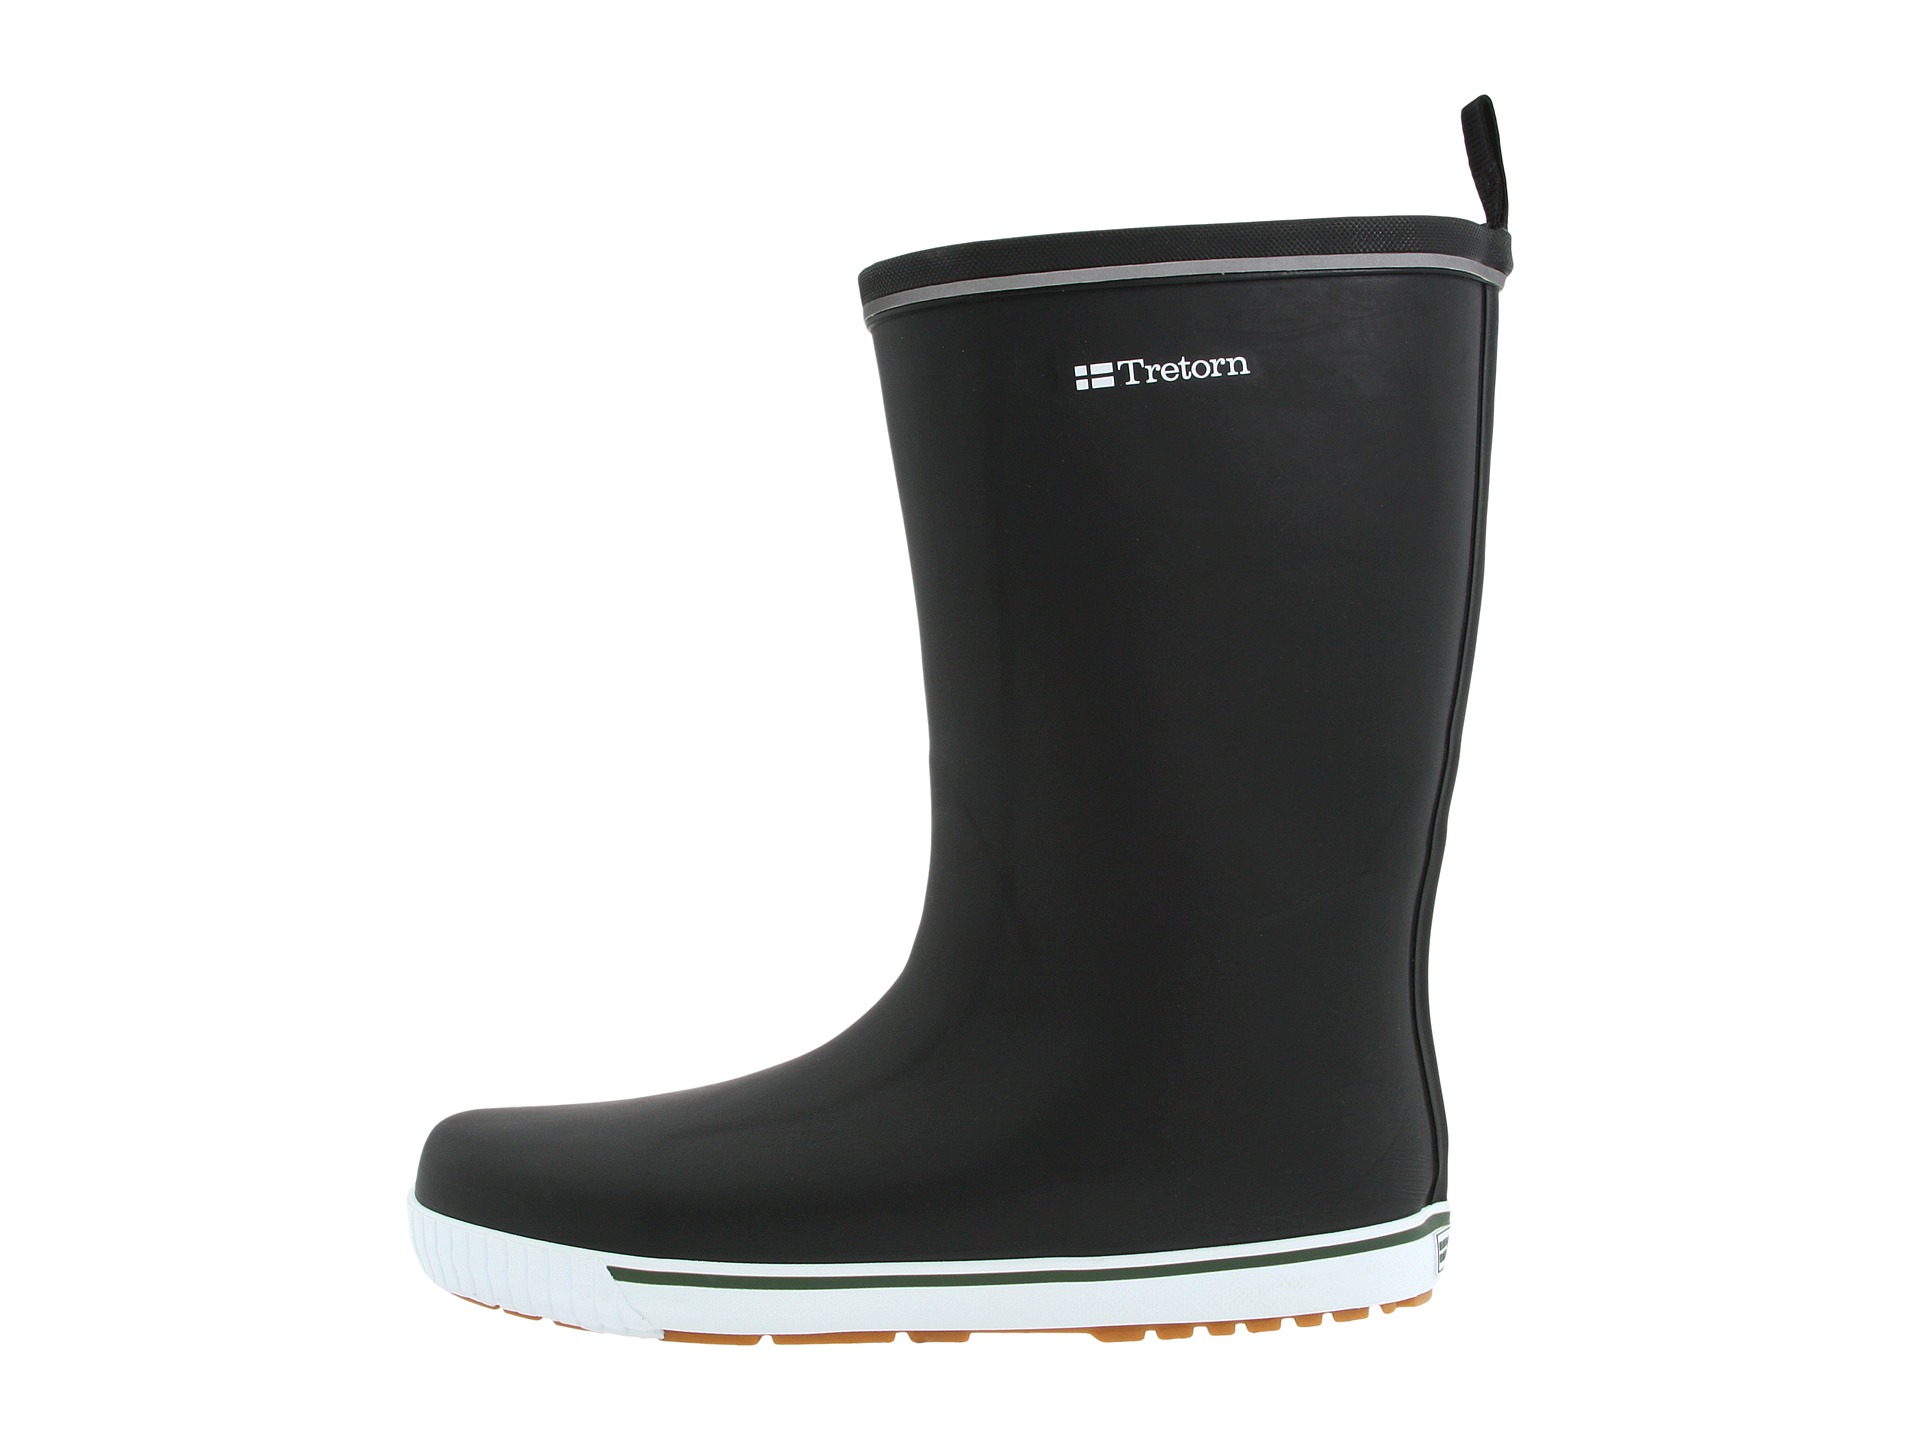 Tretorn Skerry Rubber Rain Boot, Shoes | Shipped Free at Zappos